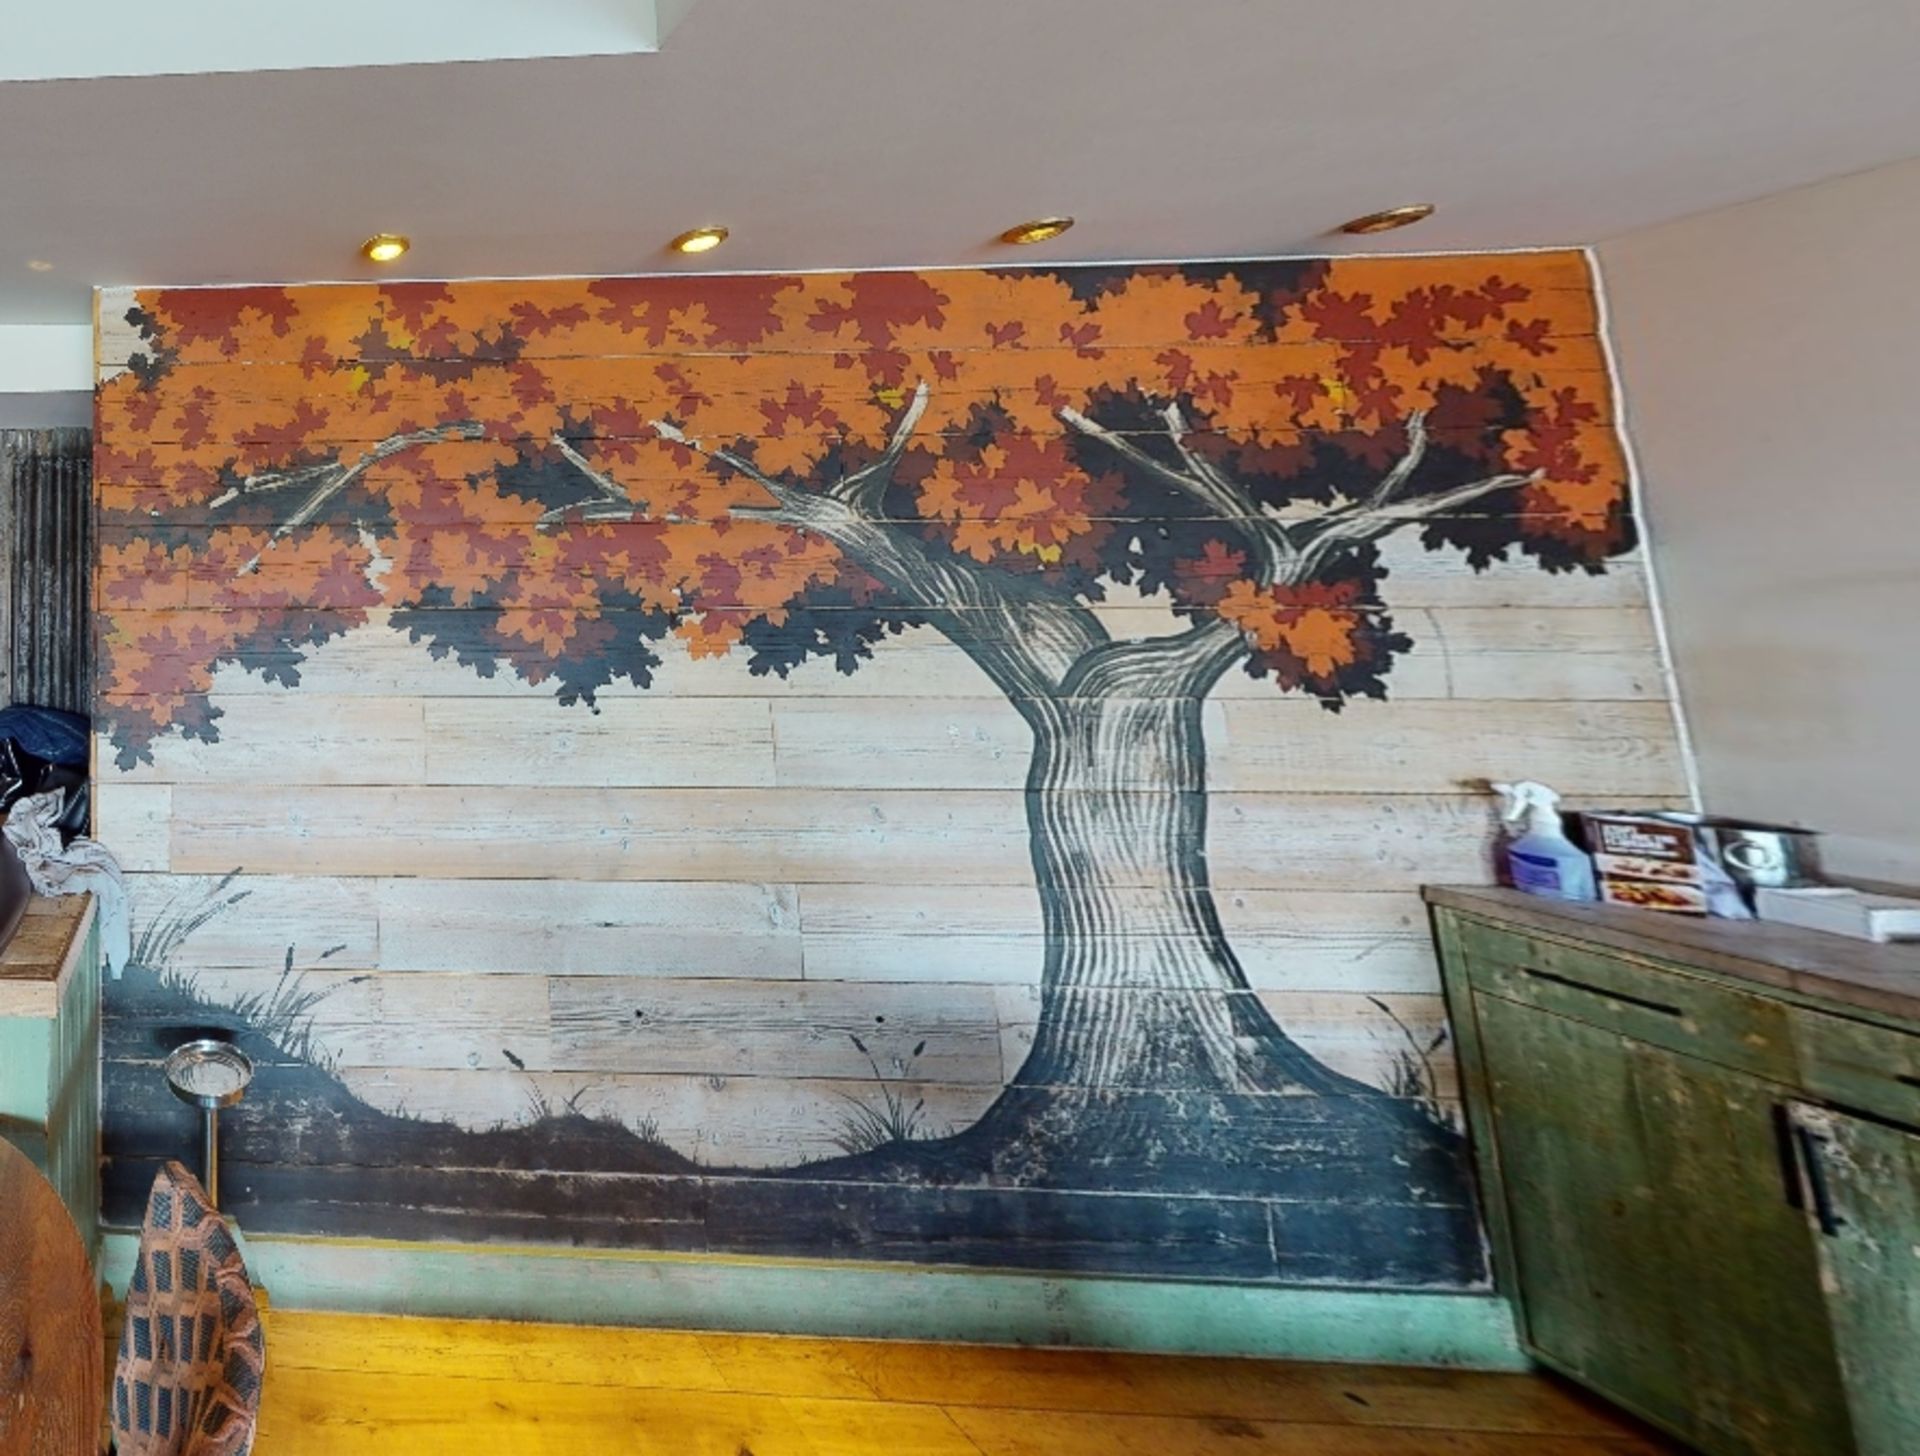 1 x Natural Wood Wall Covering Panels Featuring a Hand Painted Leafy Autumn Tree - Image 5 of 7